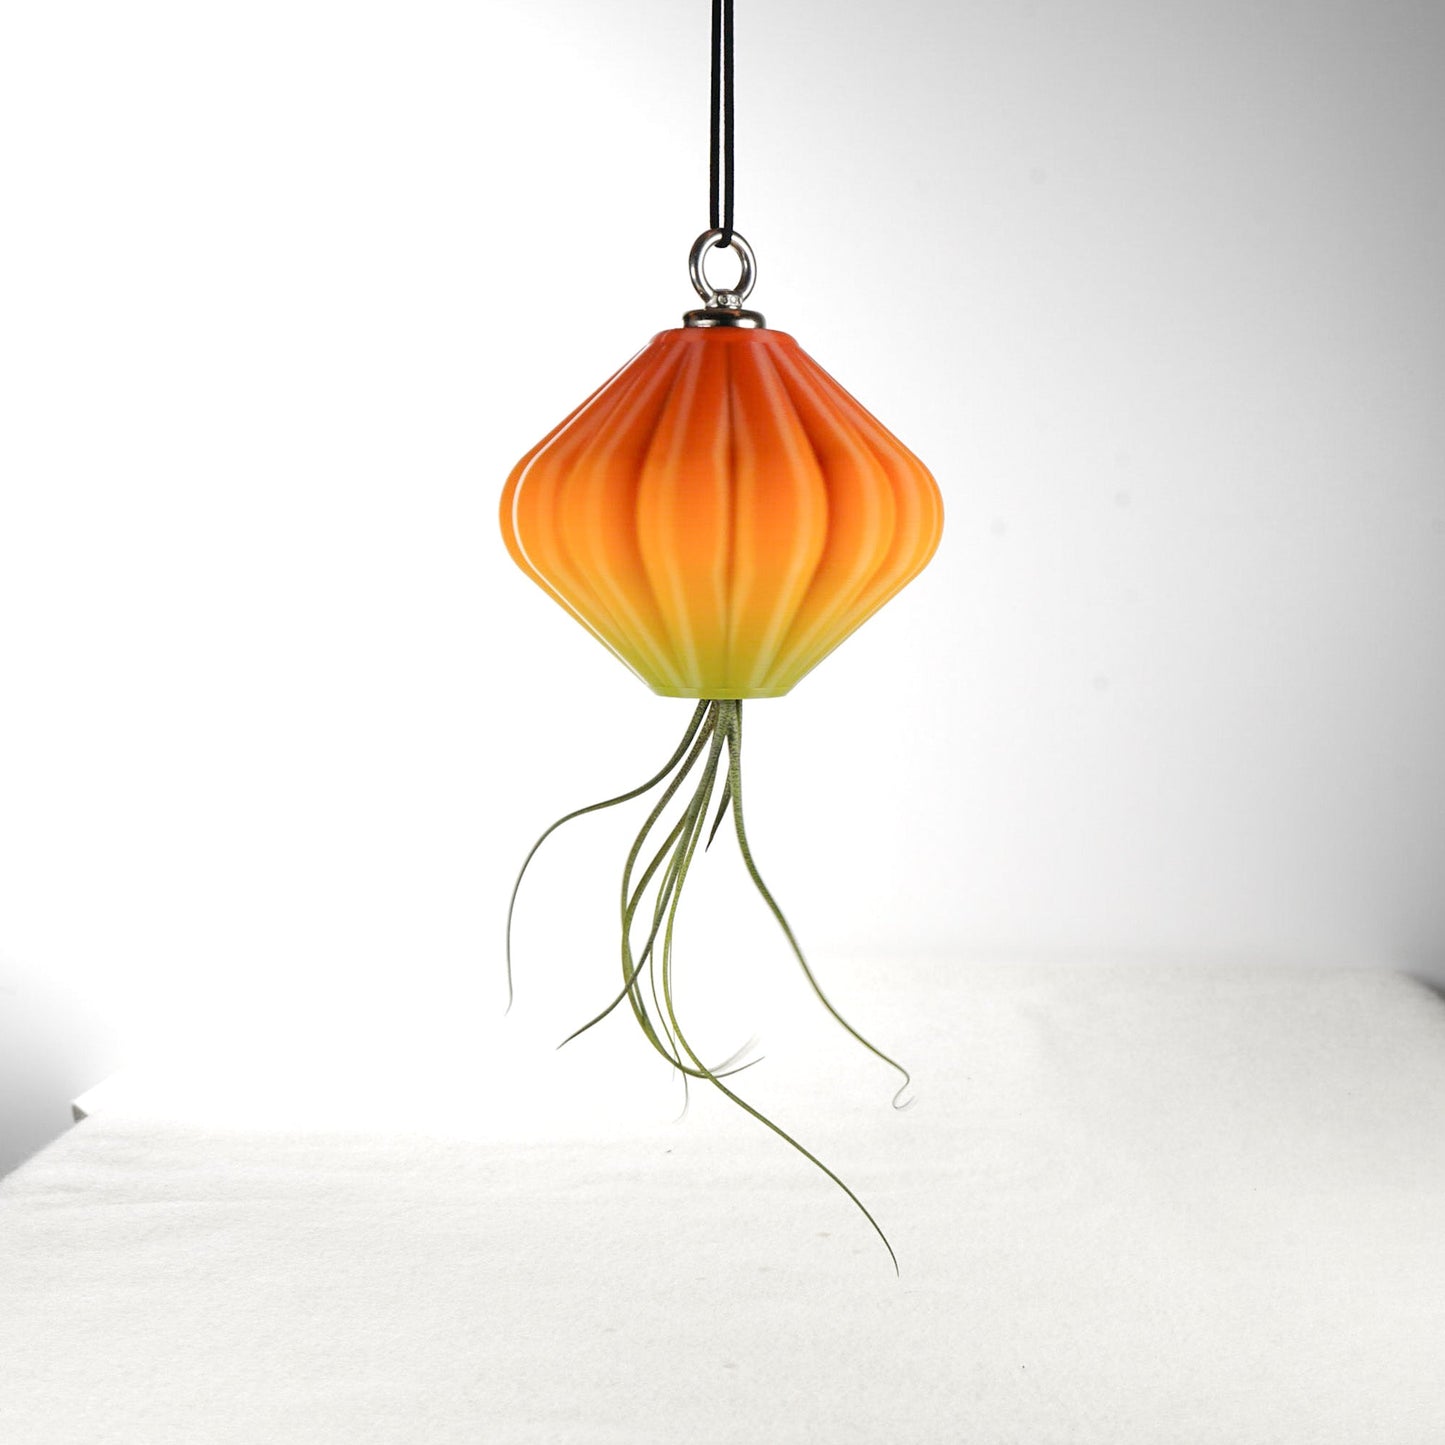 MAGNETIC Air Planter, JellyFish, Air Plant Included by Rosebud HomeGoods